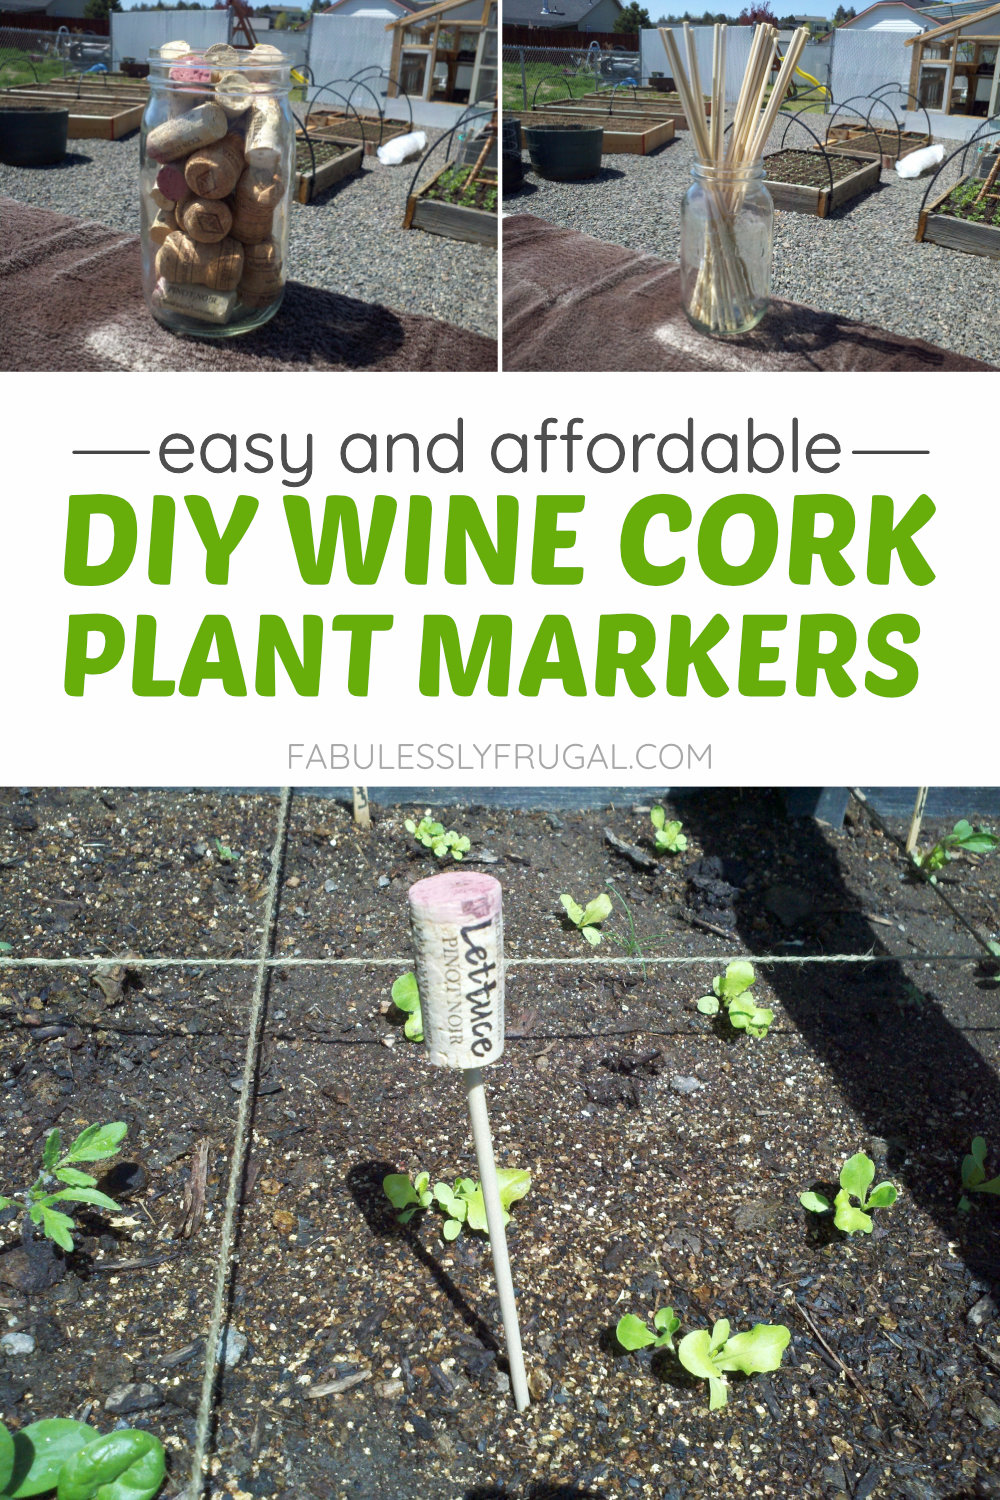 Easy and affordable DIY wine cork plant markers